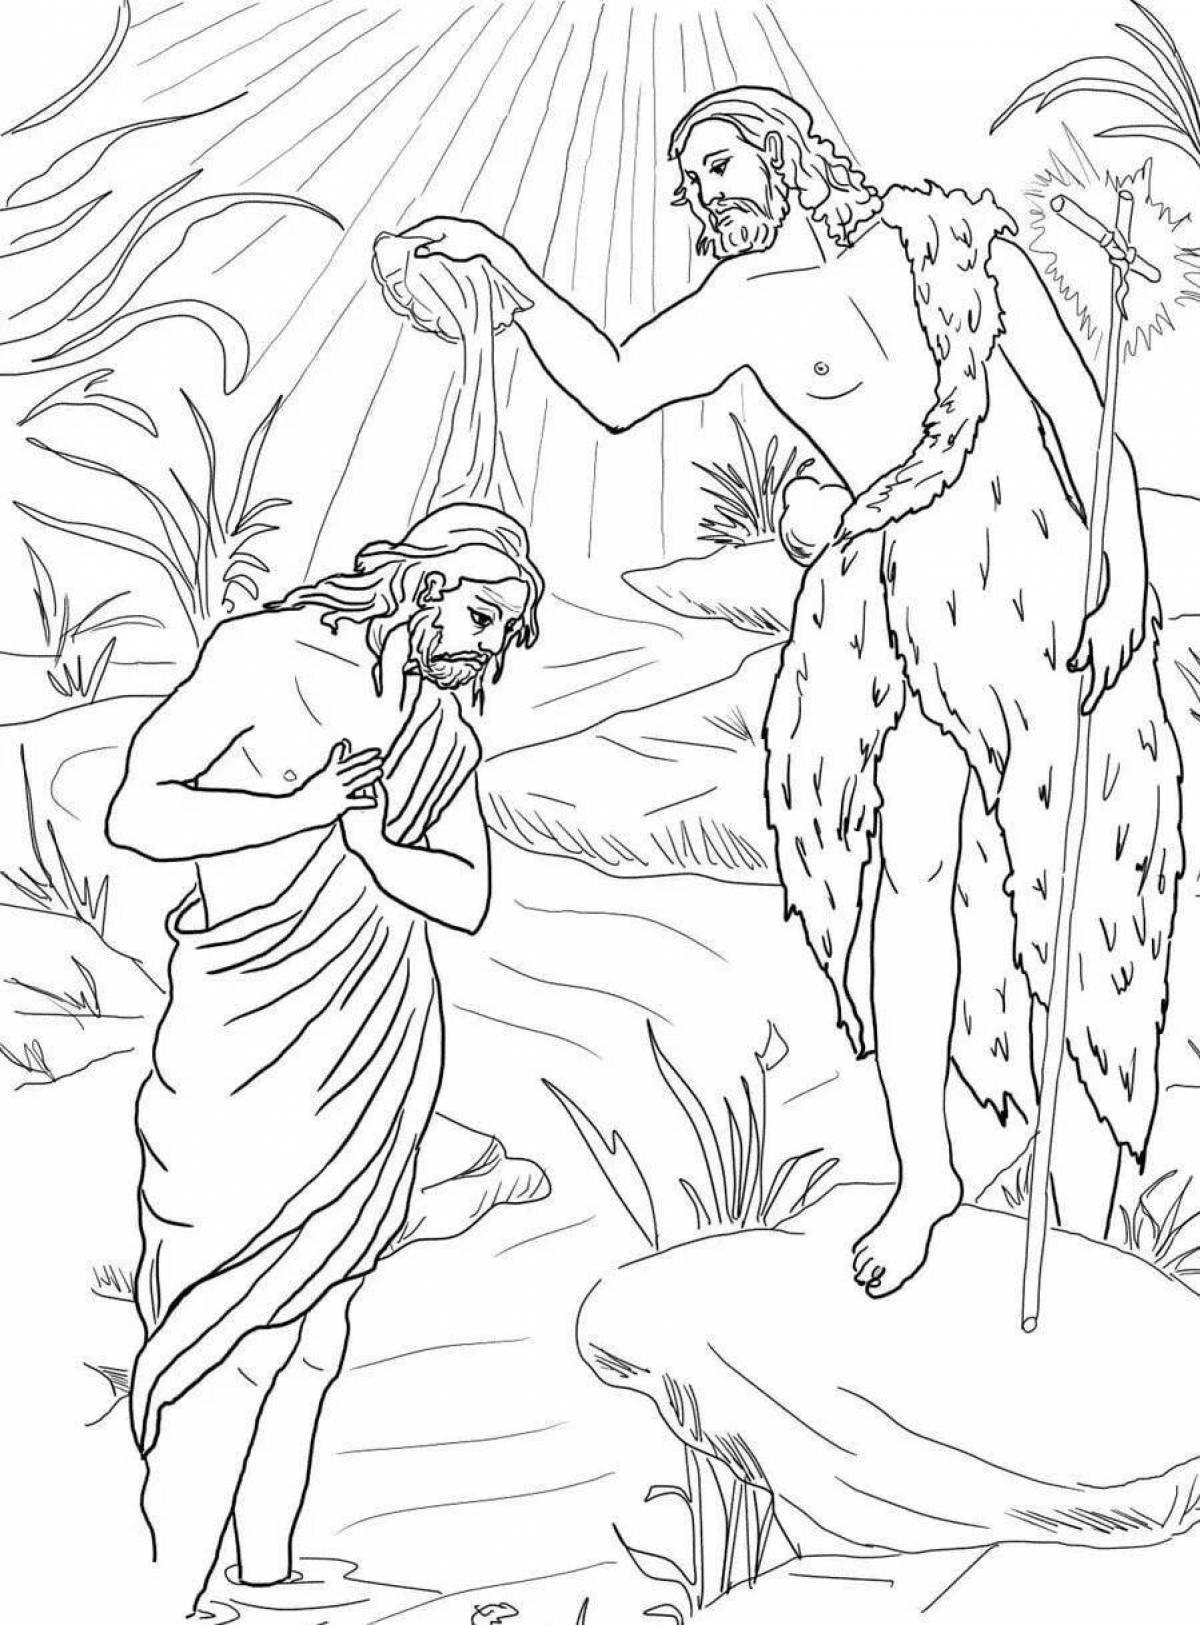 Bright baptism of the Lord coloring book